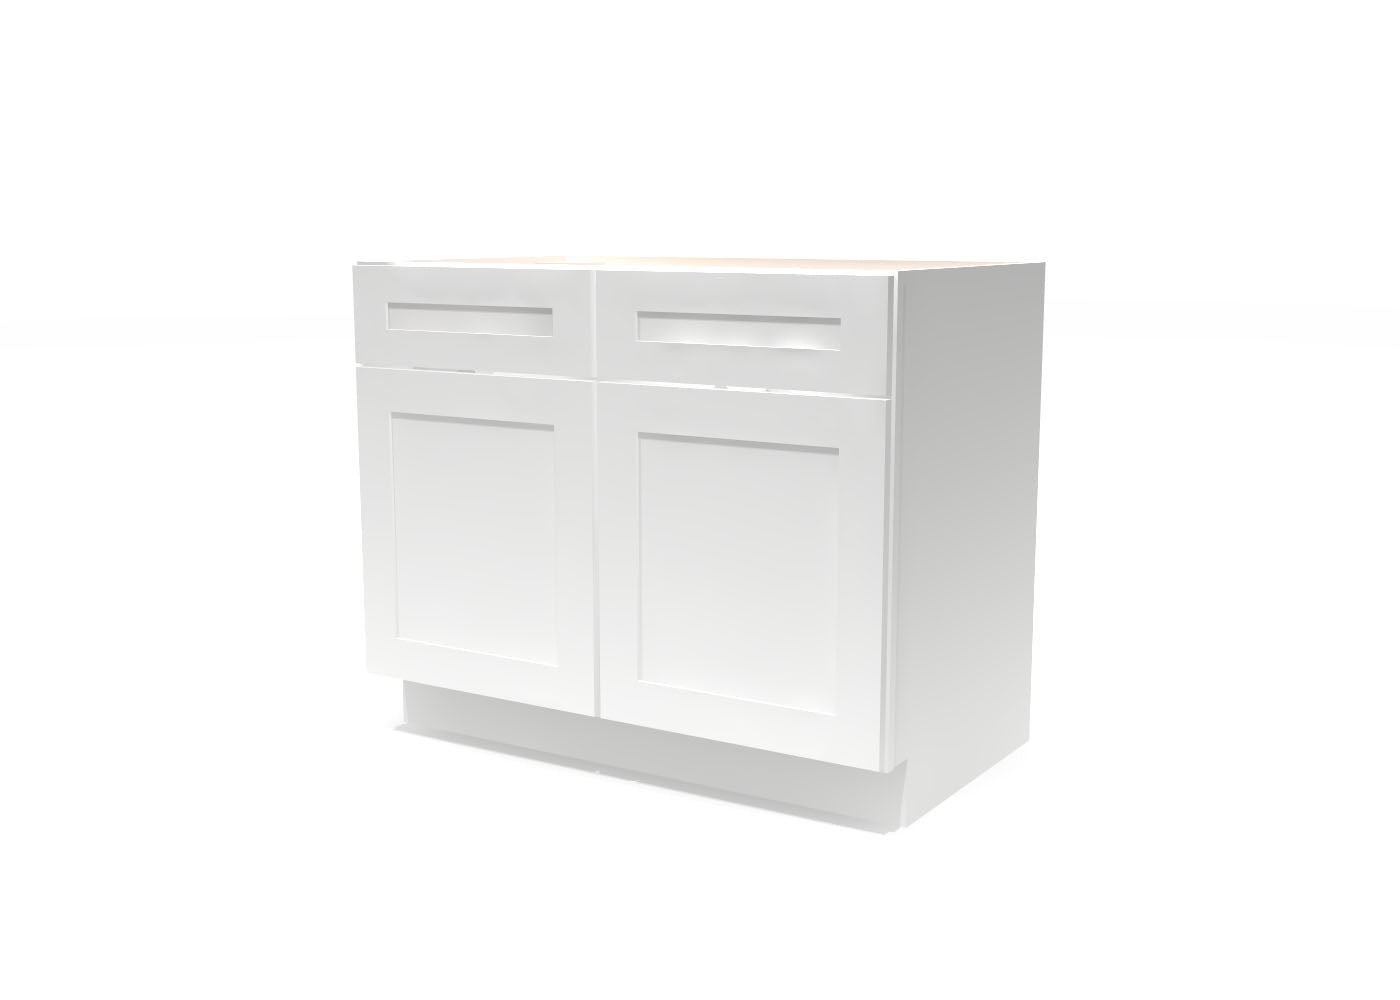 Base Double Door Two Drawers 42" Wide White Shaker Cabinet